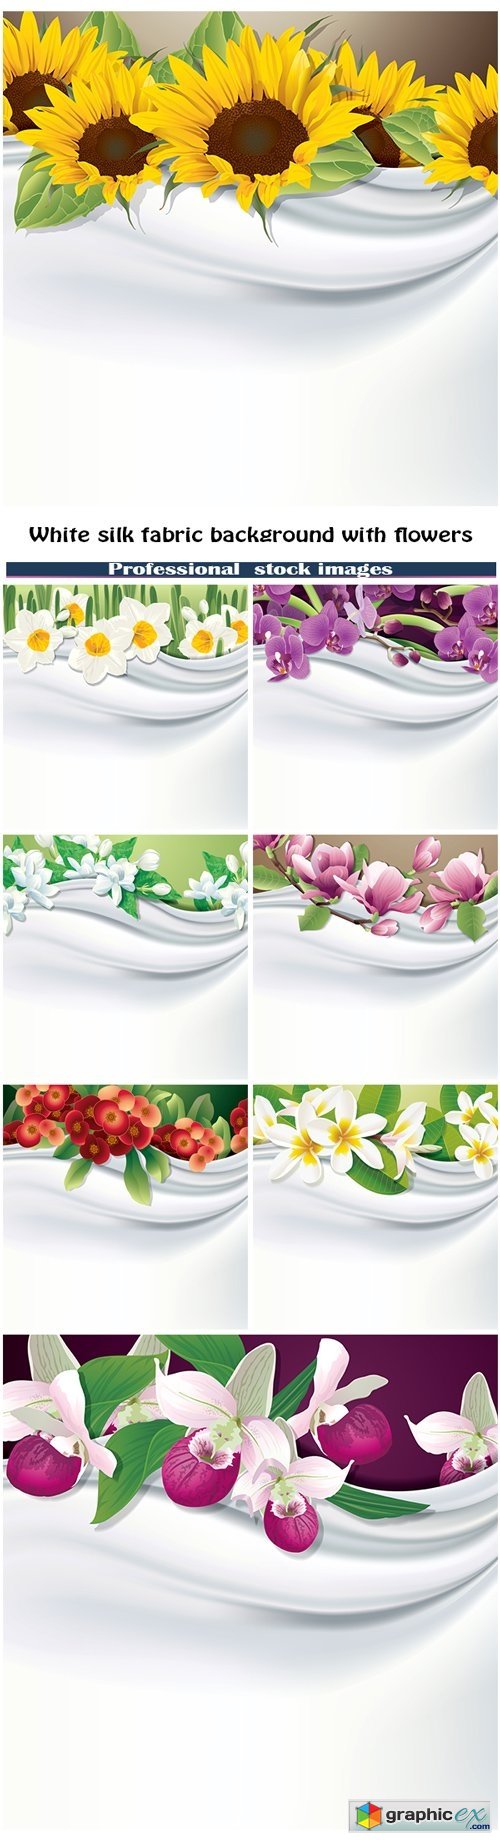 White silk fabric background with flowers